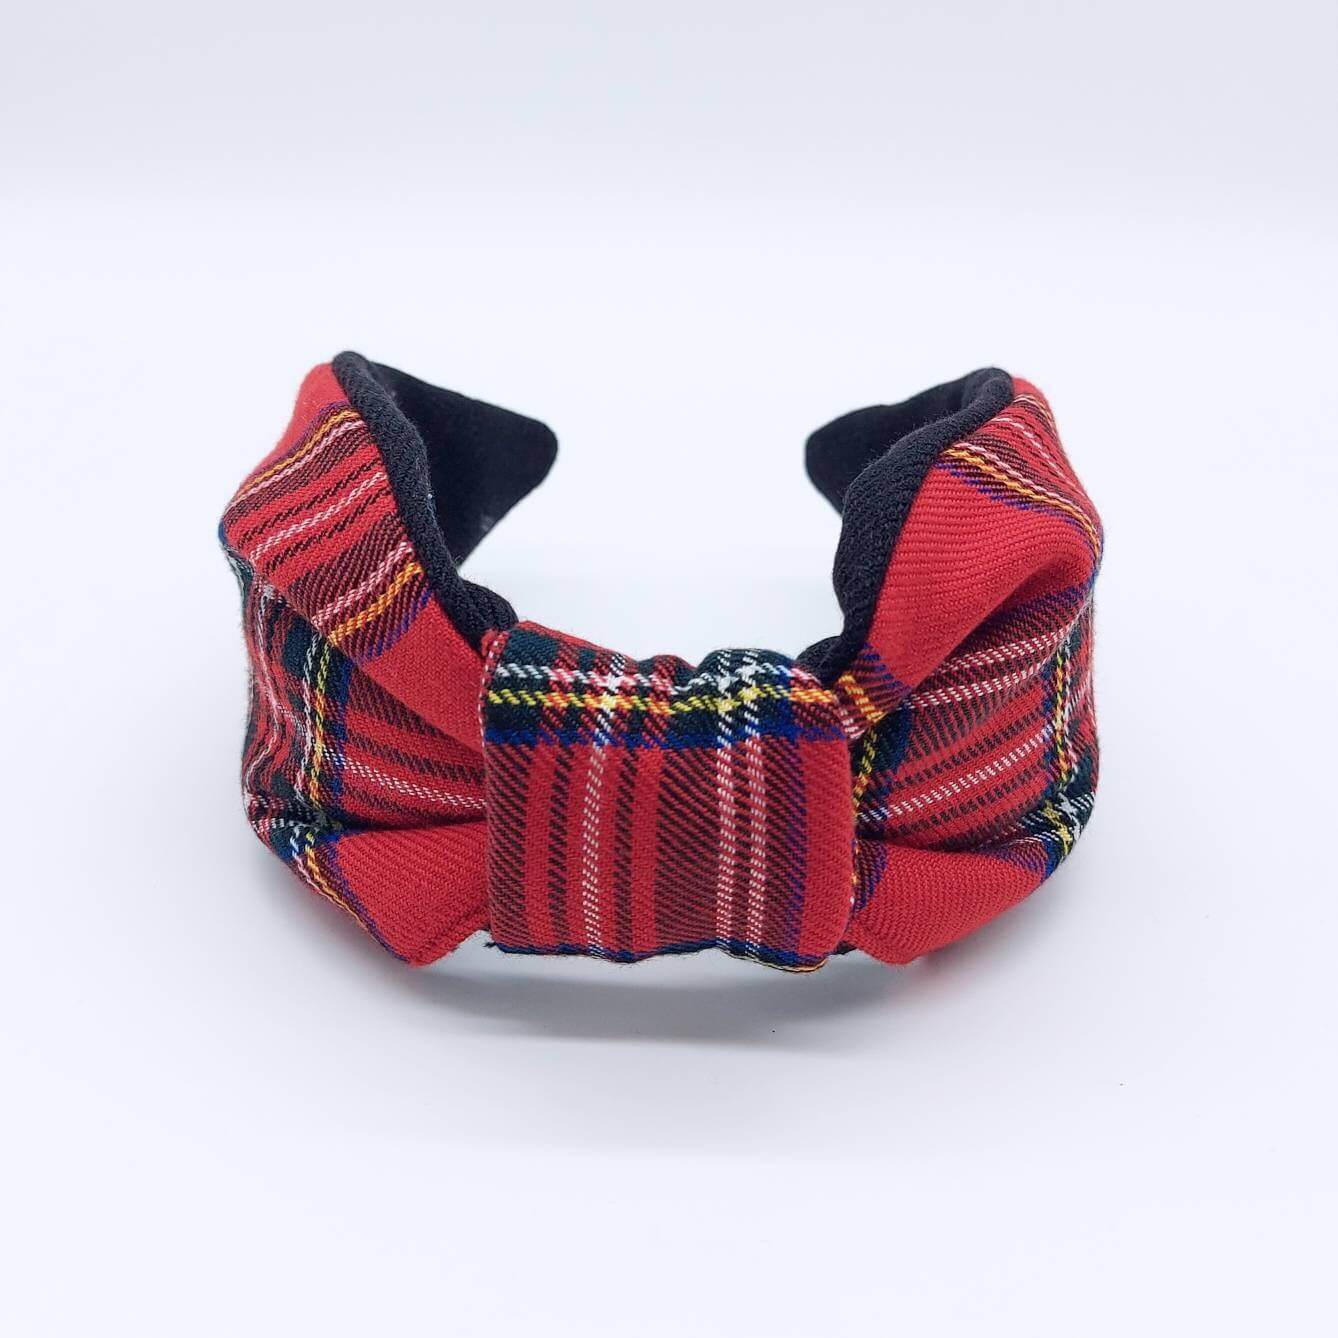 A bow-style, black and red tartan paid fabric headband with plain black lining underneath.